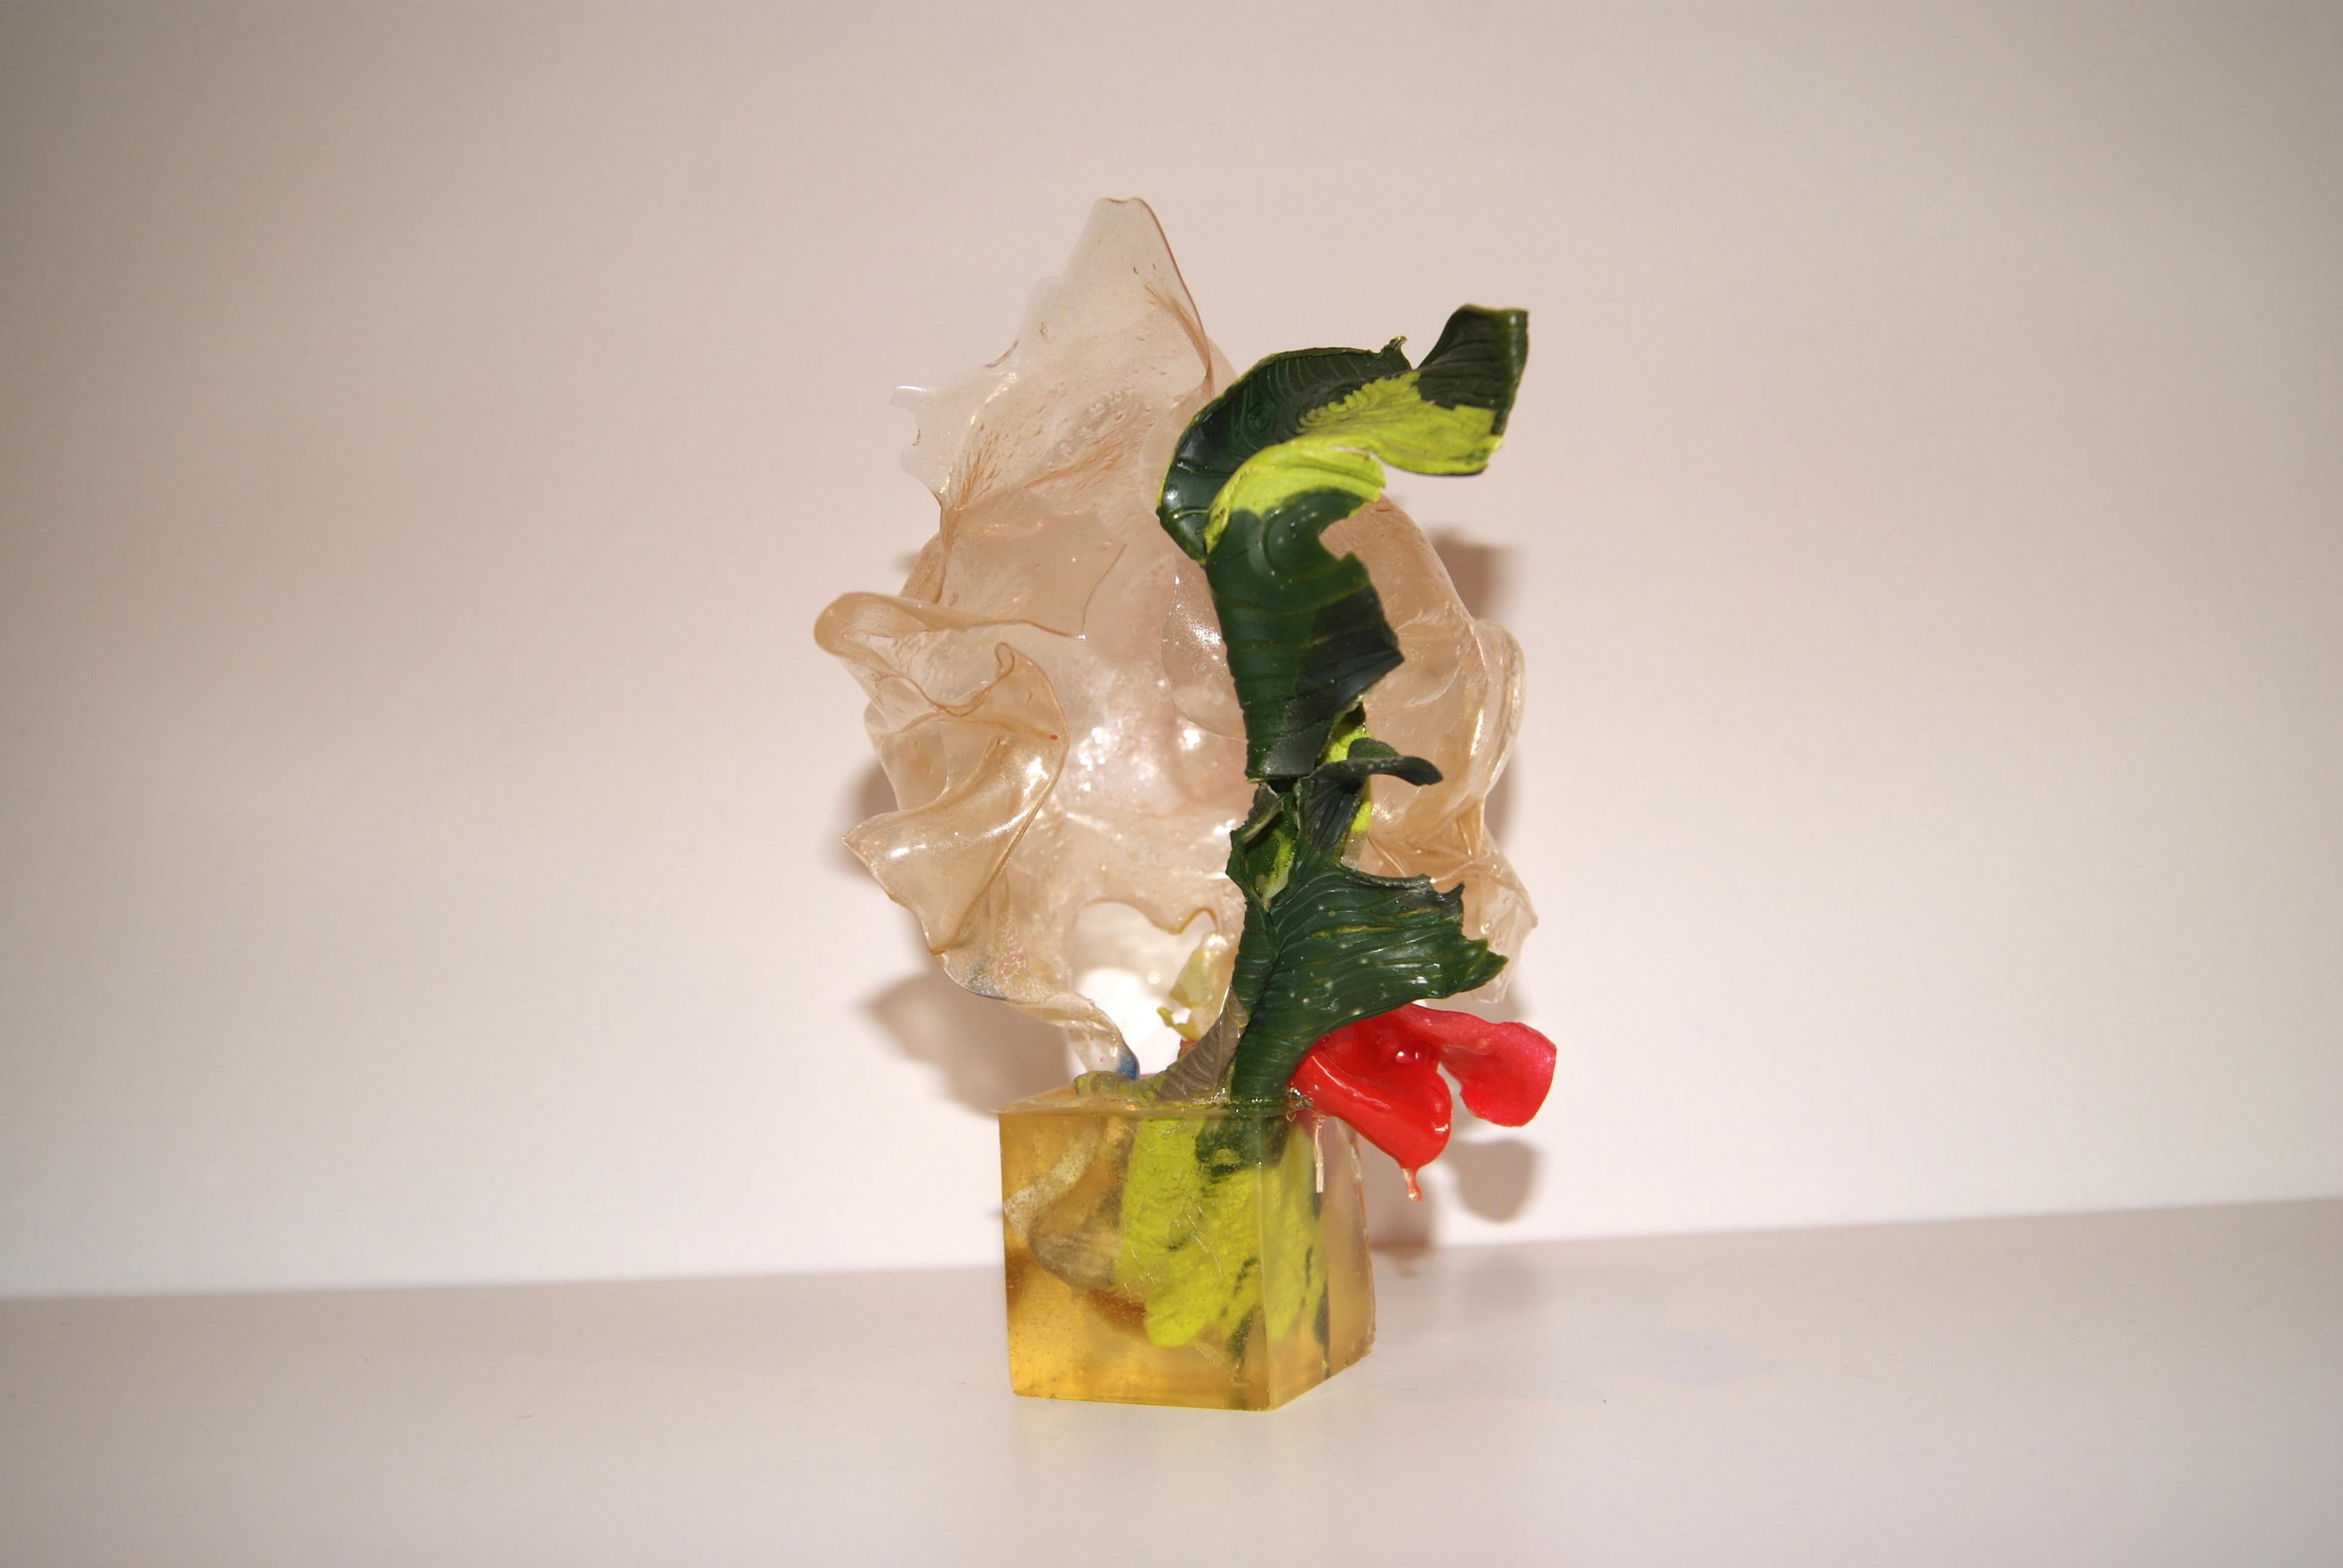 Green, red and clear biomaterial sculpture submerged in resin cube.